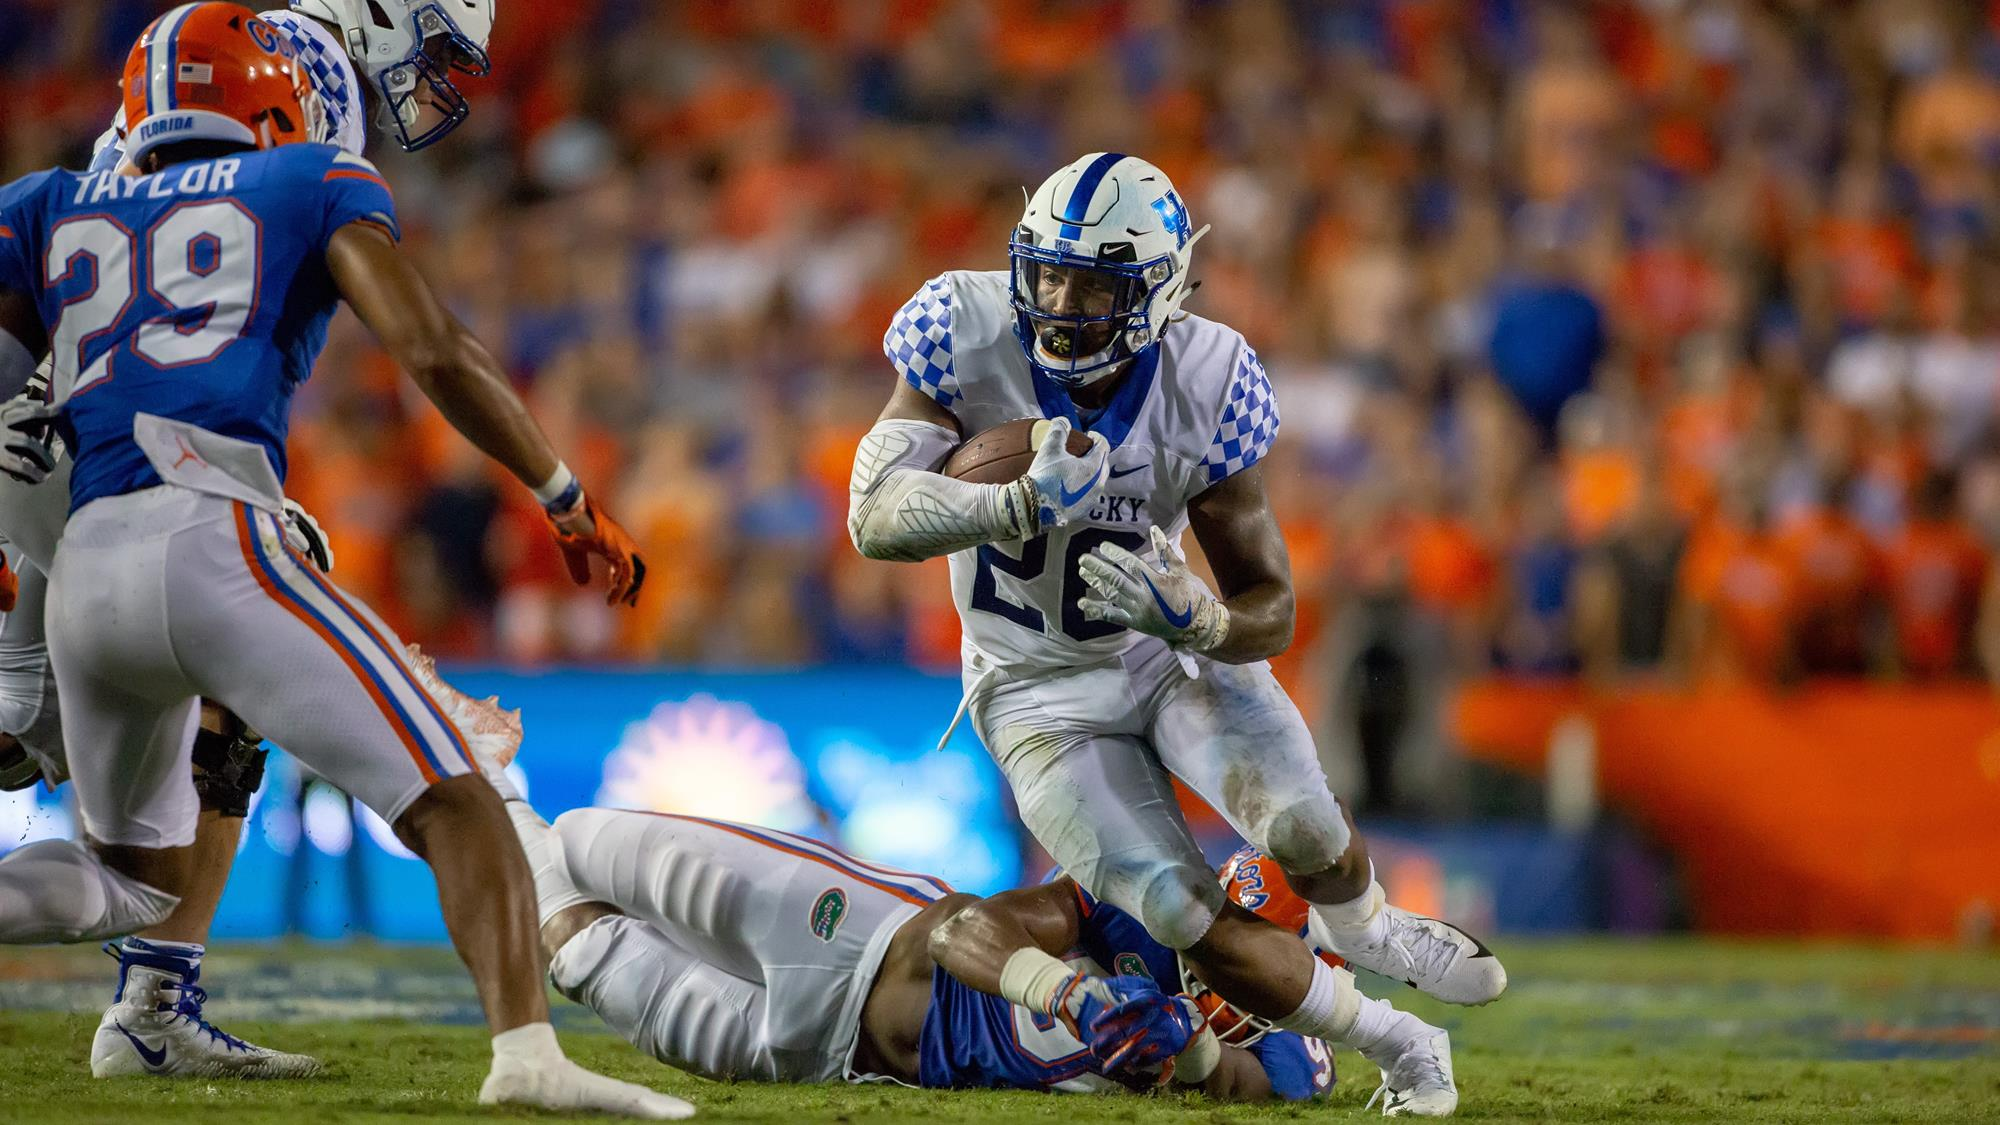 Cats Want More after Knocking Down Door vs. Florida